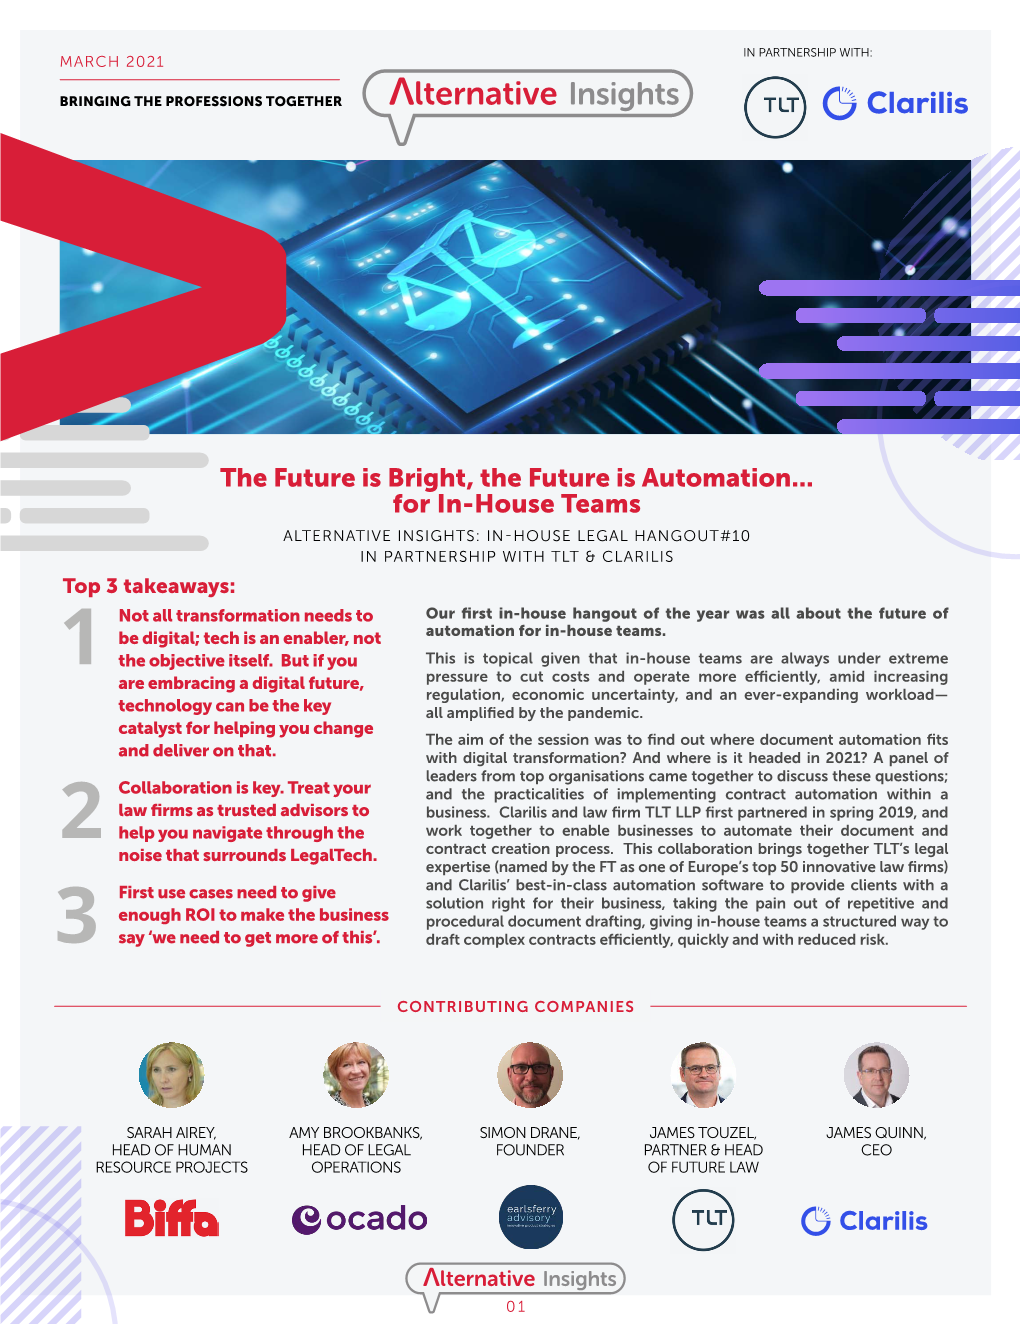 The Future Is Bright, the Future Is Automation... for In-House Teams ALTERNATIVE INSIGHTS: IN-HOUSE LEGAL HANGOUT#10 in PARTNERSHIP with TLT & CLARILIS